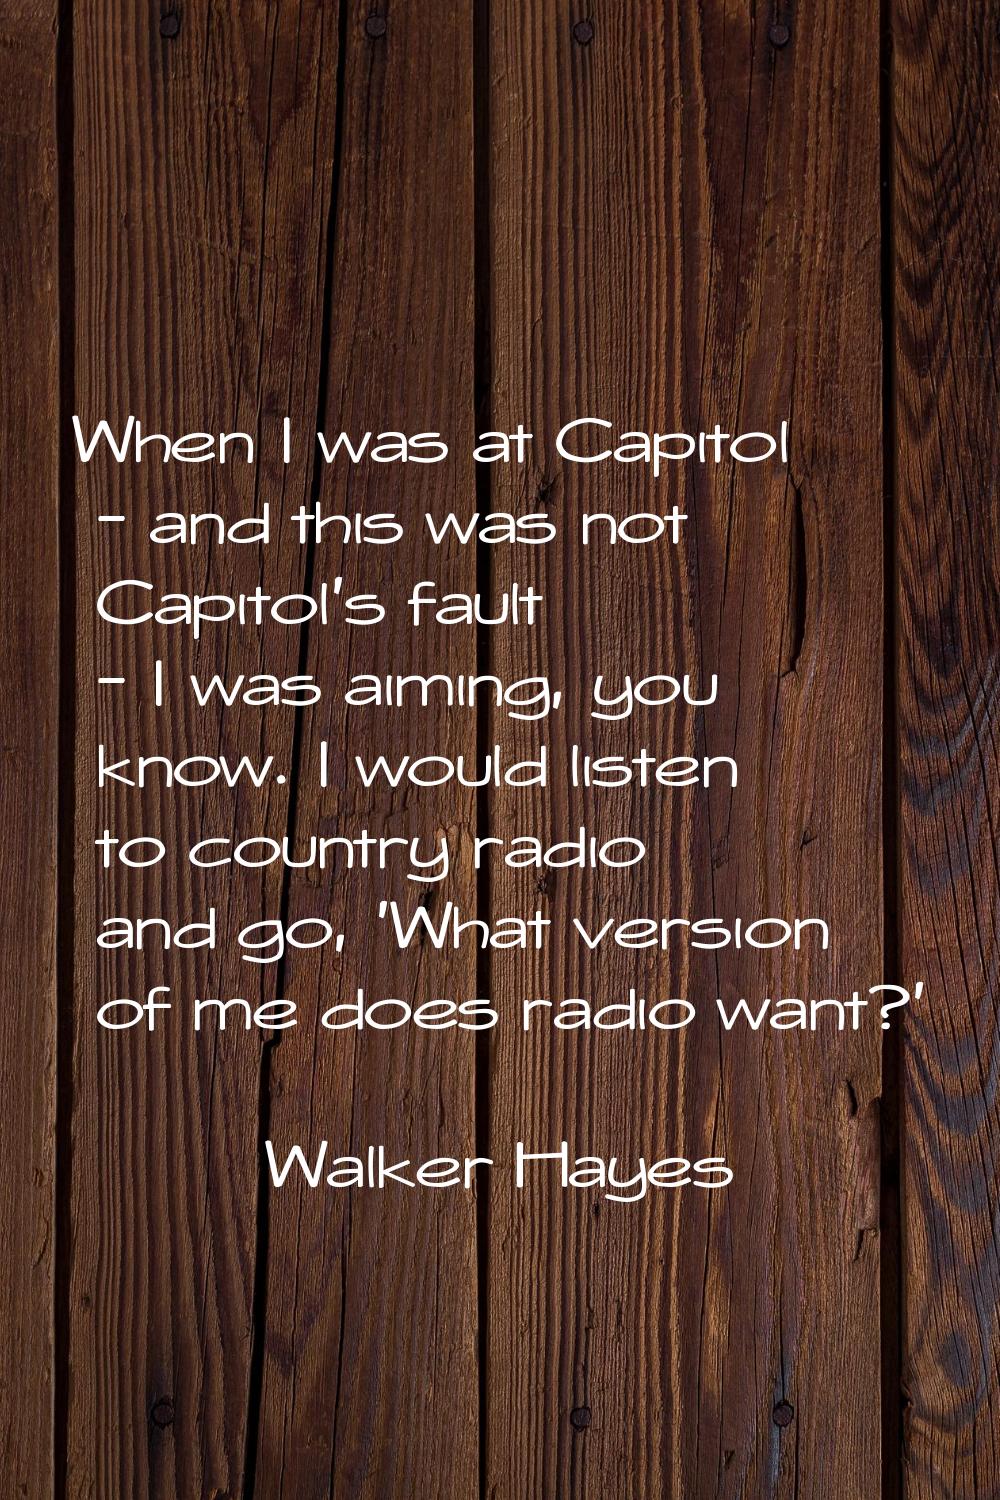 When I was at Capitol - and this was not Capitol's fault - I was aiming, you know. I would listen t